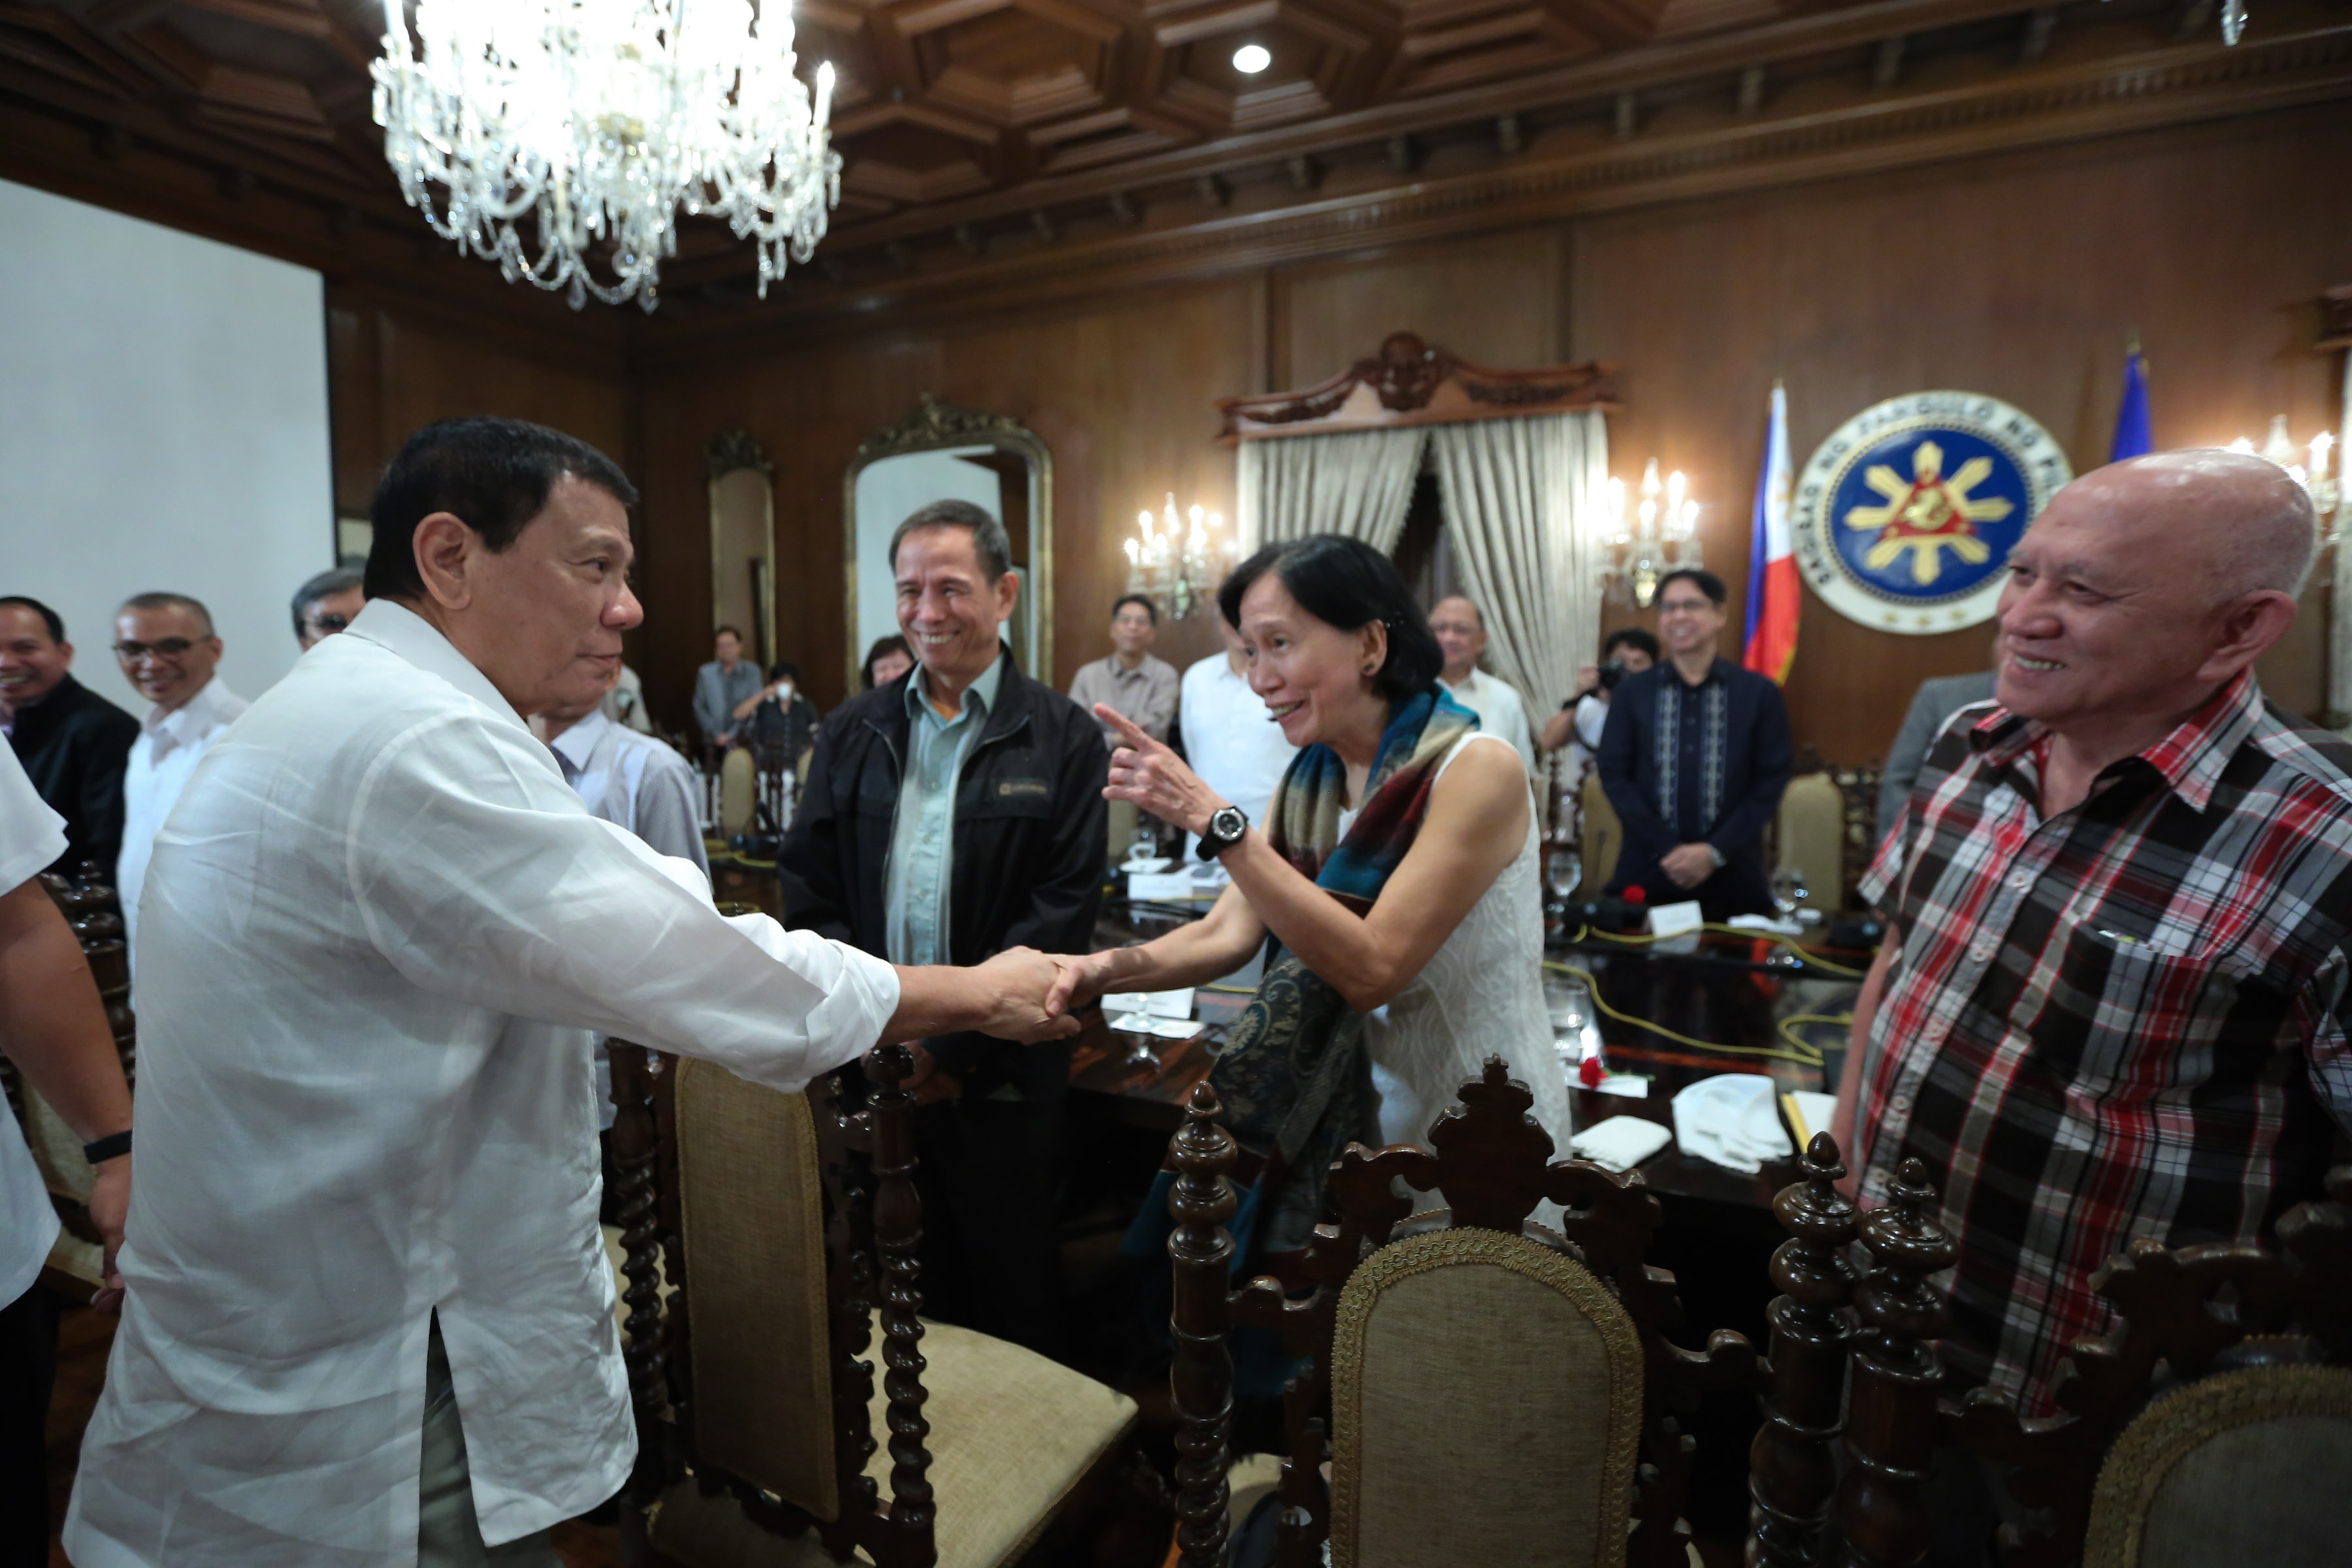 FROM THE PAST. President Rodrigo Duterte shares a light moment with Wilma Tiamzon, chairperson of the Reciprocal Working Group on End of Hostilities and Disposition of Forces (RWG-EHDF) of the National Democratic Front of the Philippines (NDFP), in a meeting held in Malacañang's State Dining Room on September 26. PPD photo 